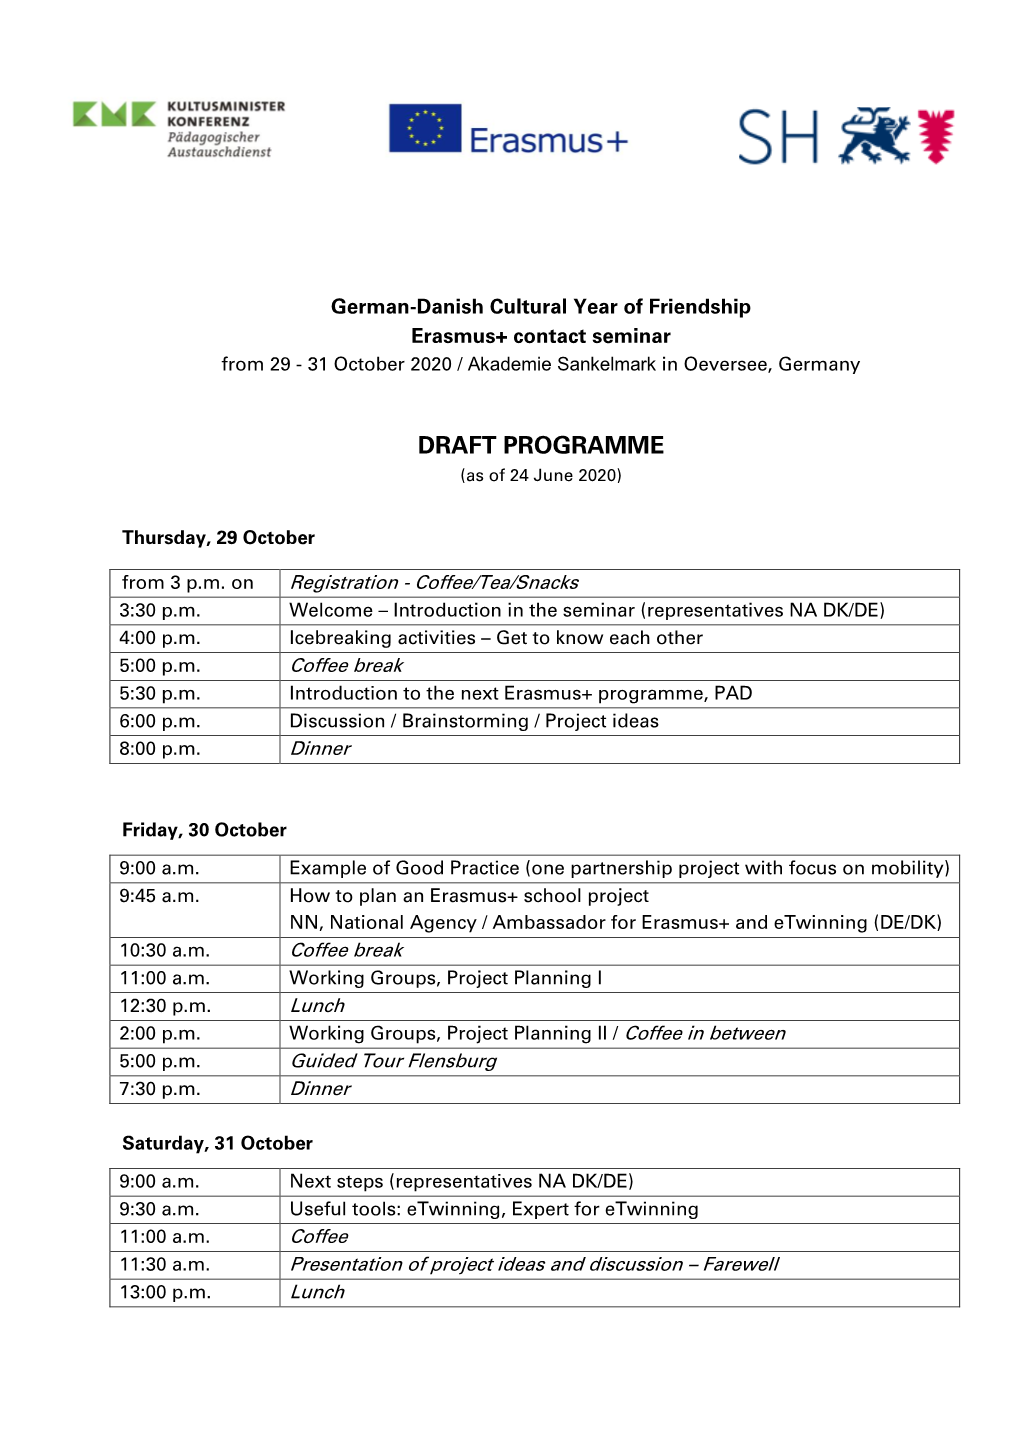 DRAFT PROGRAMME (As of 24 June 2020)